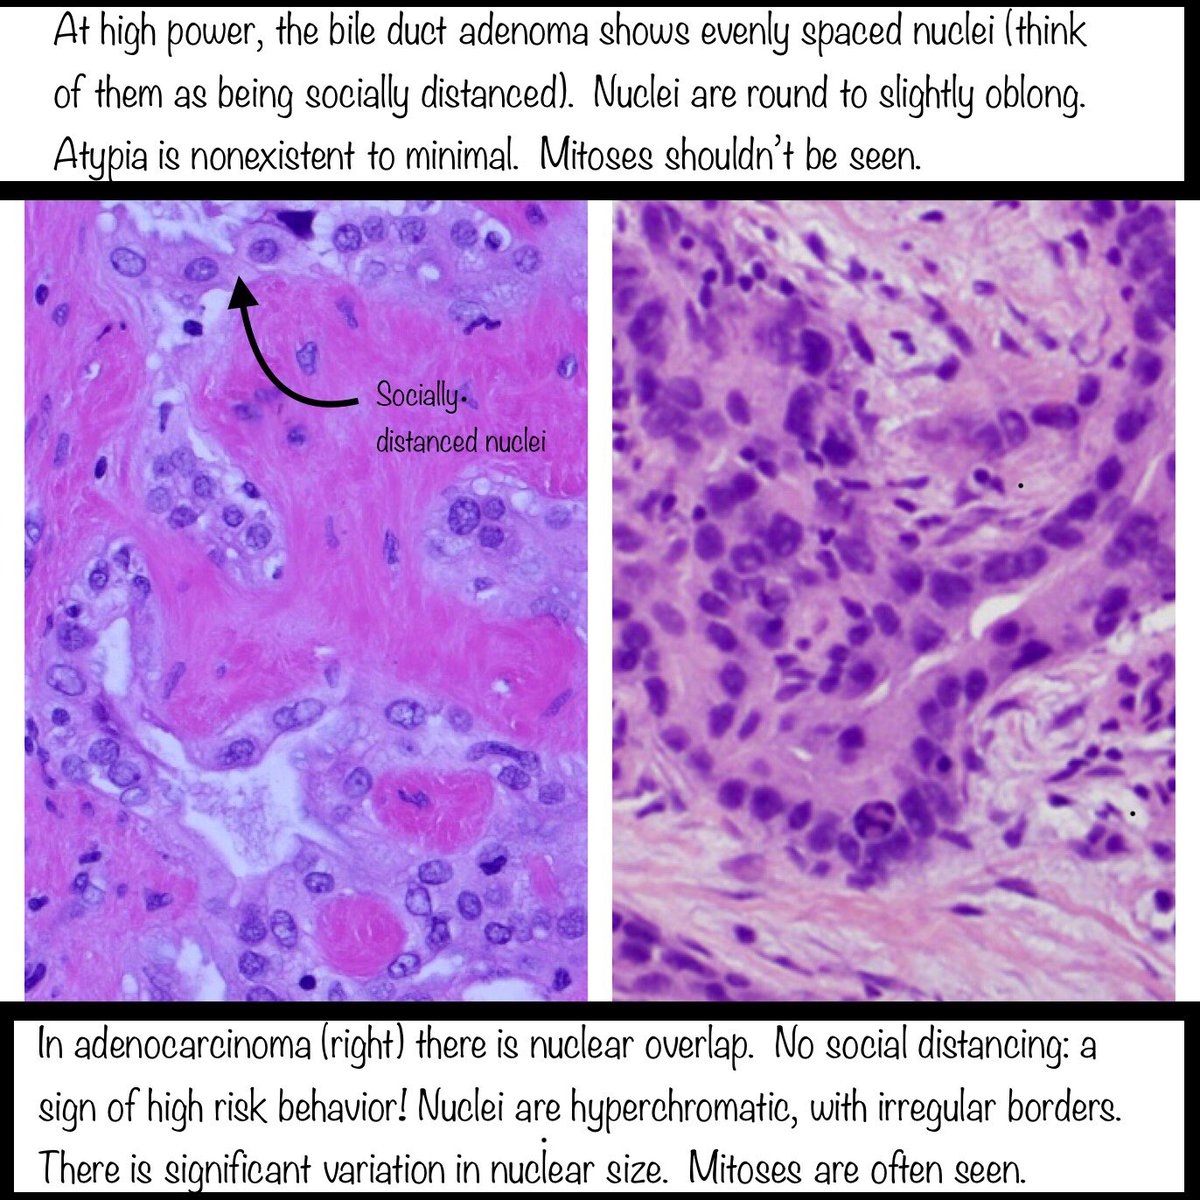 Thank you to  @RhondaYantiss and  @merepitt for letting me borrow the cancer images from their excellent & comprehensive review article on this topic:  https://pubmed.ncbi.nlm.nih.gov/29751885/ 